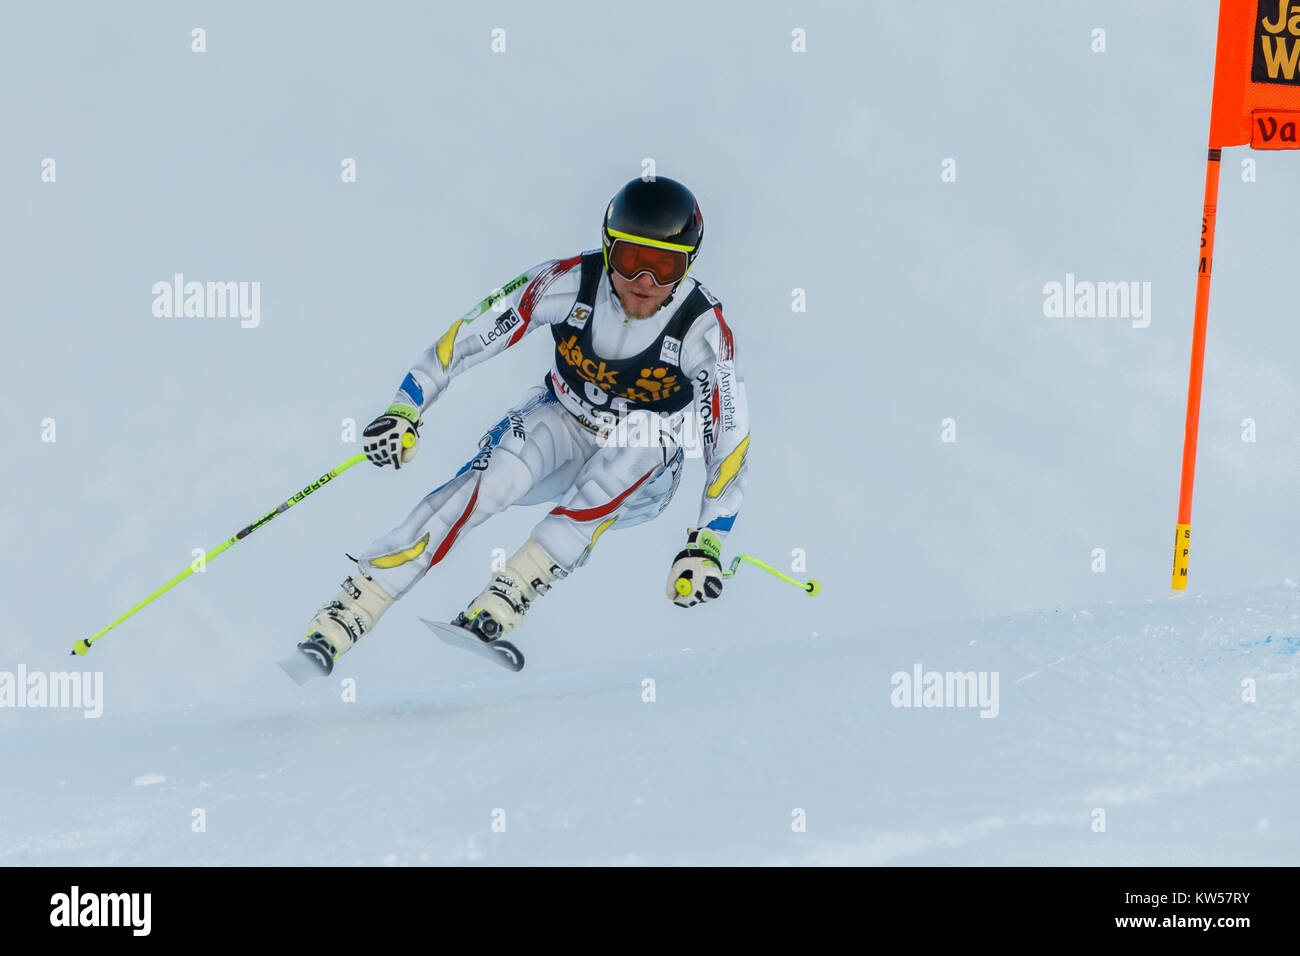 Val Gardena, Italy 14 December 2017. VARGAS BOURGUET Matias (And) competing in the Audi Fis Alpine Skiing World Cup Men’s Downhill Training Stock Photo